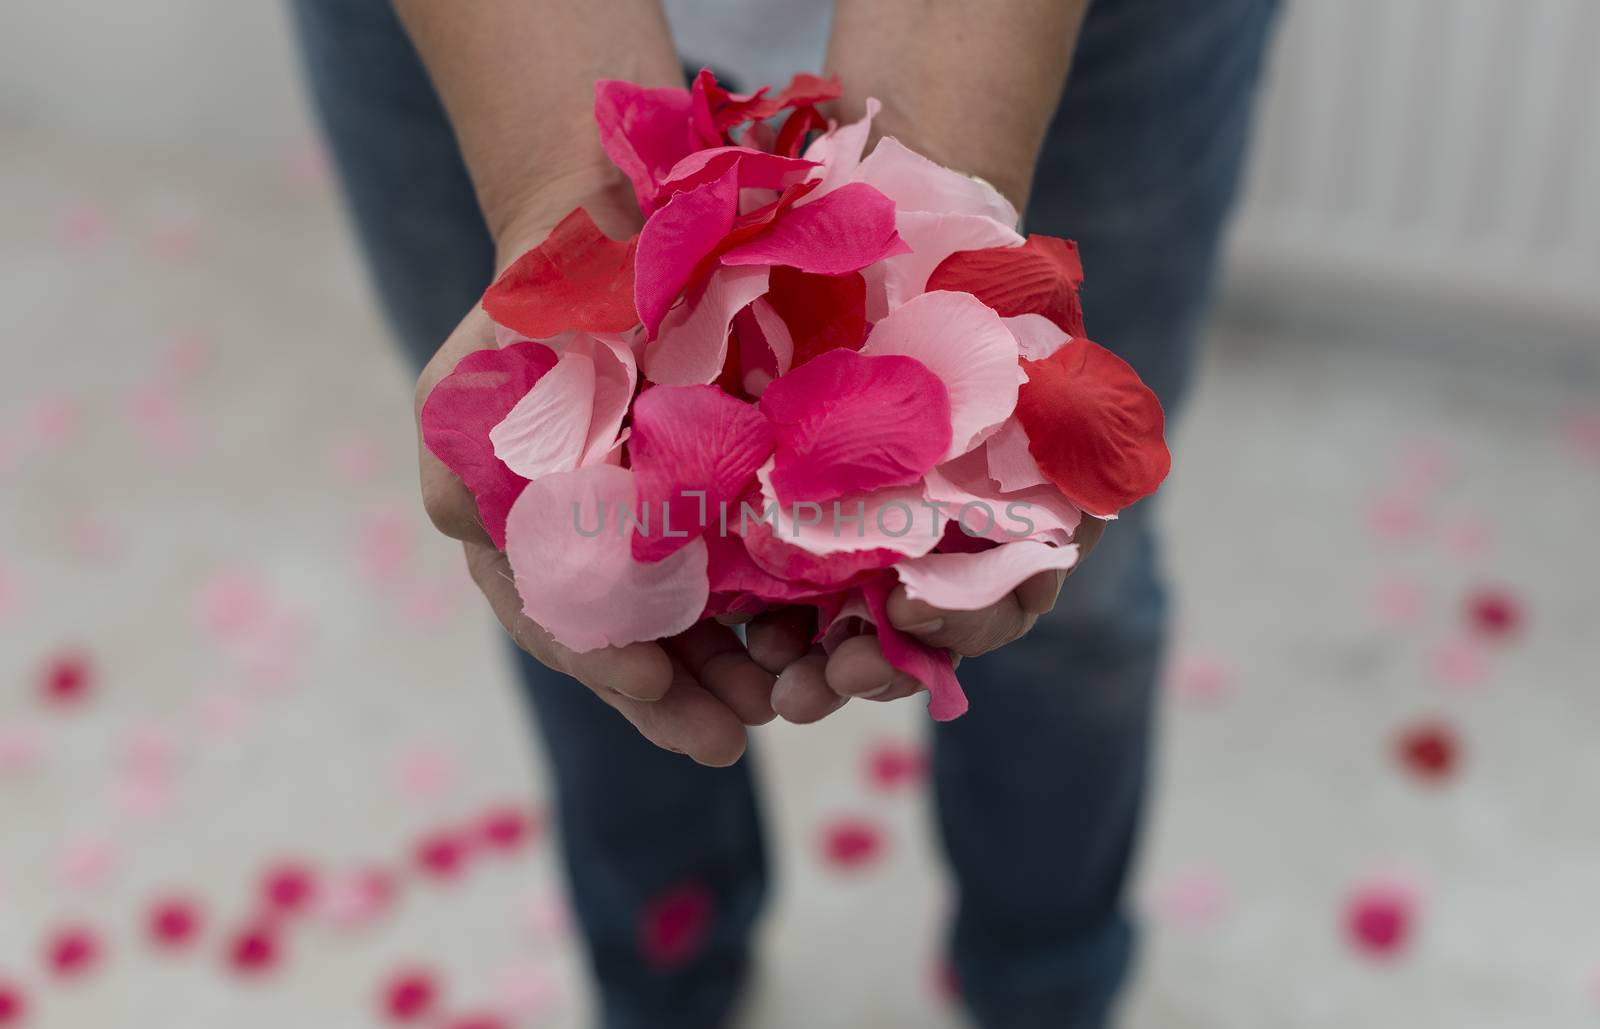 woman holding rose petals by compuinfoto